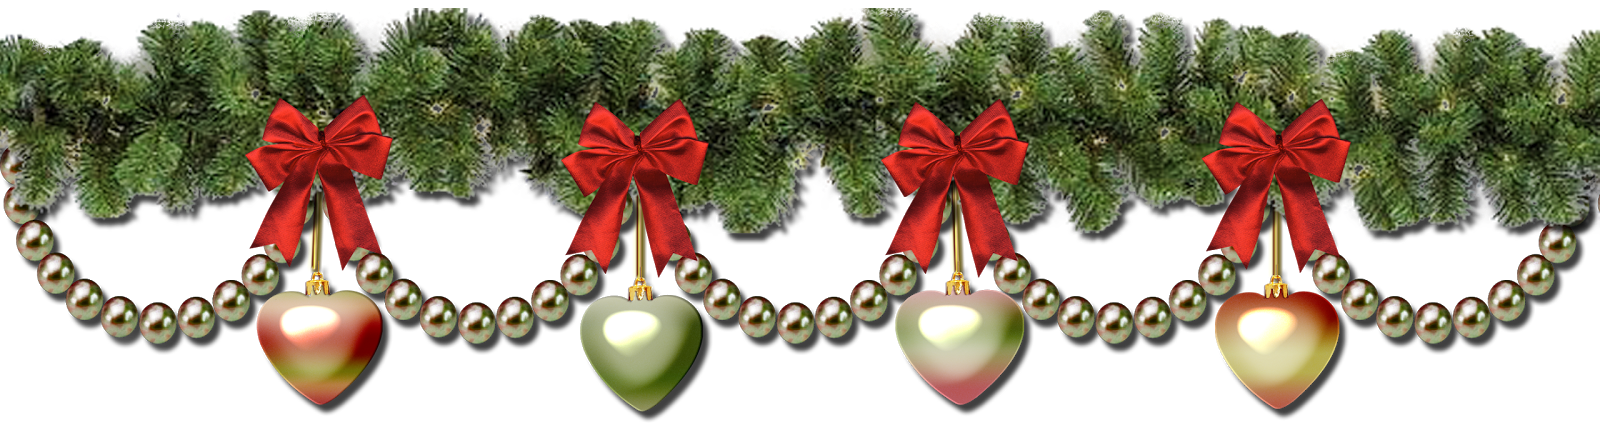 garland clipart animated